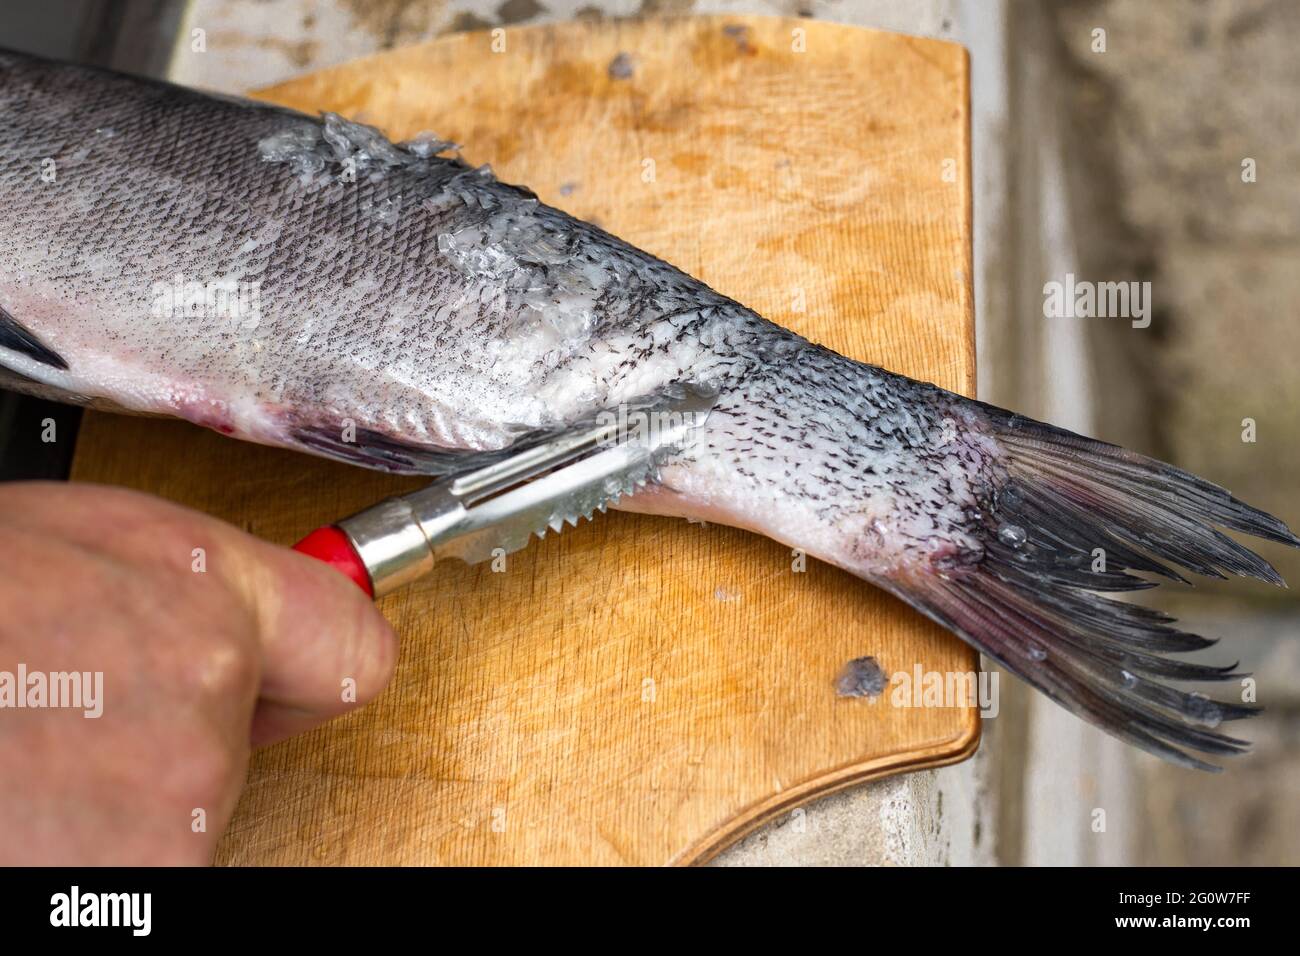 A man cleans fish with a fish scaler in a street kitchen. Outdoor cooking in summer. Stock Photo